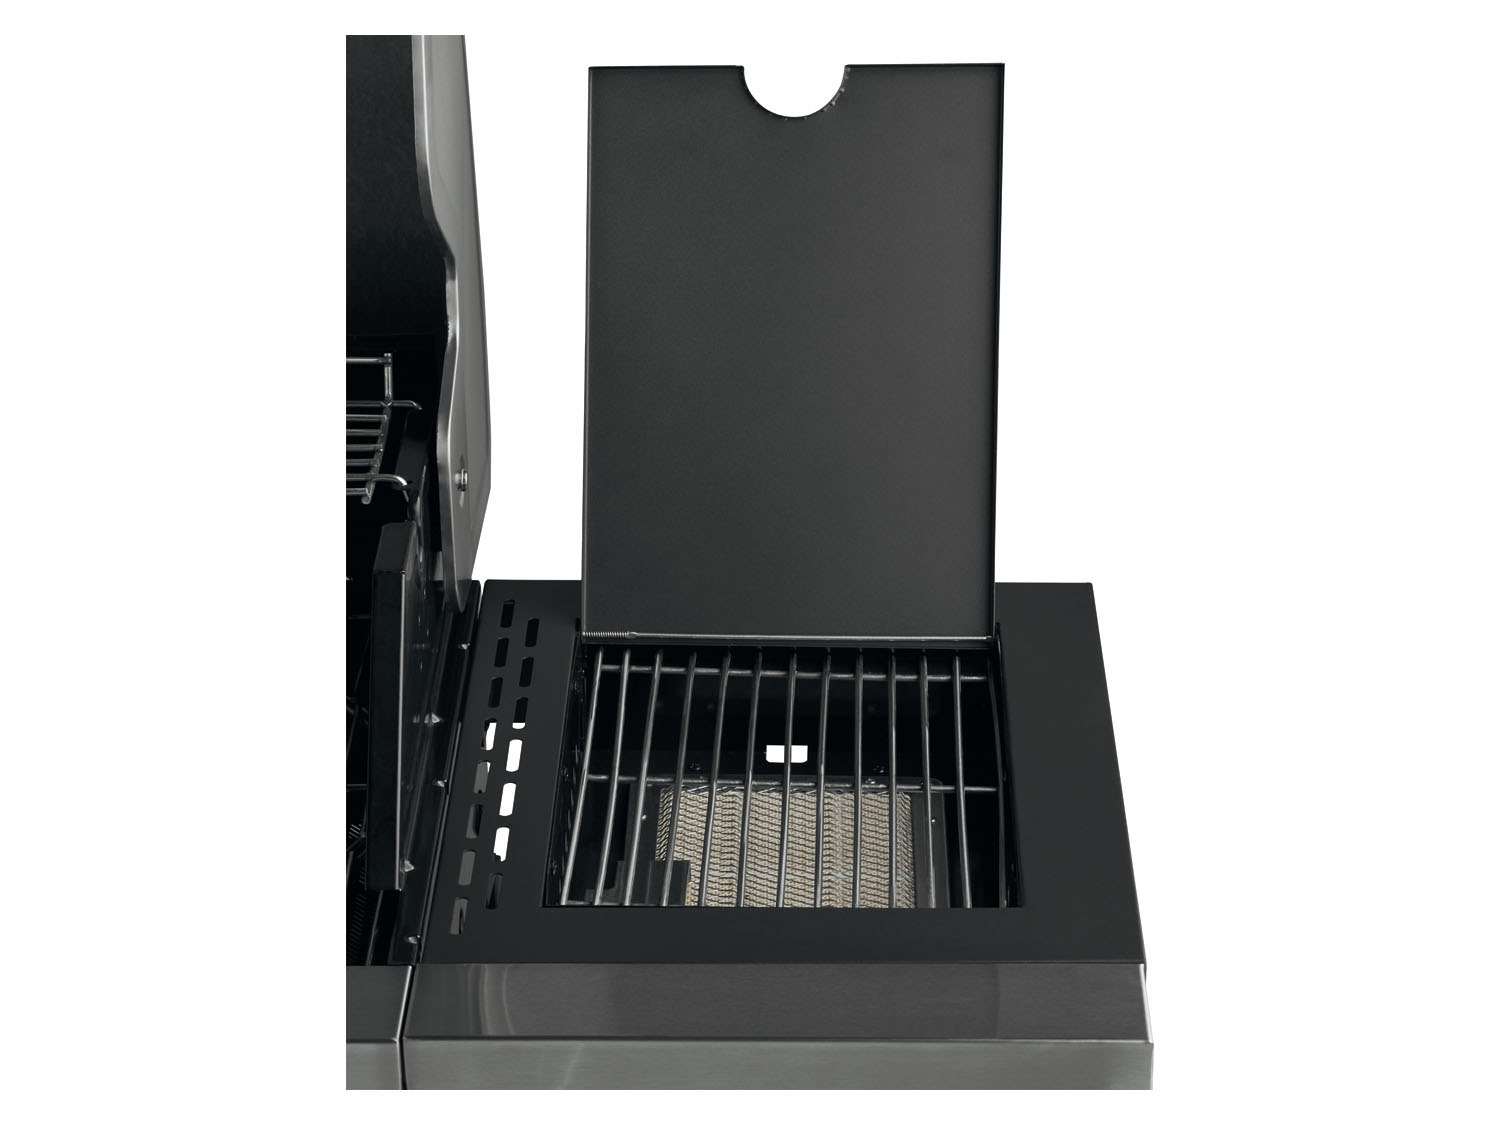 GRILLMEISTER Gasgrill, 4plus1 Brenner, LIDL 19,7 kW 